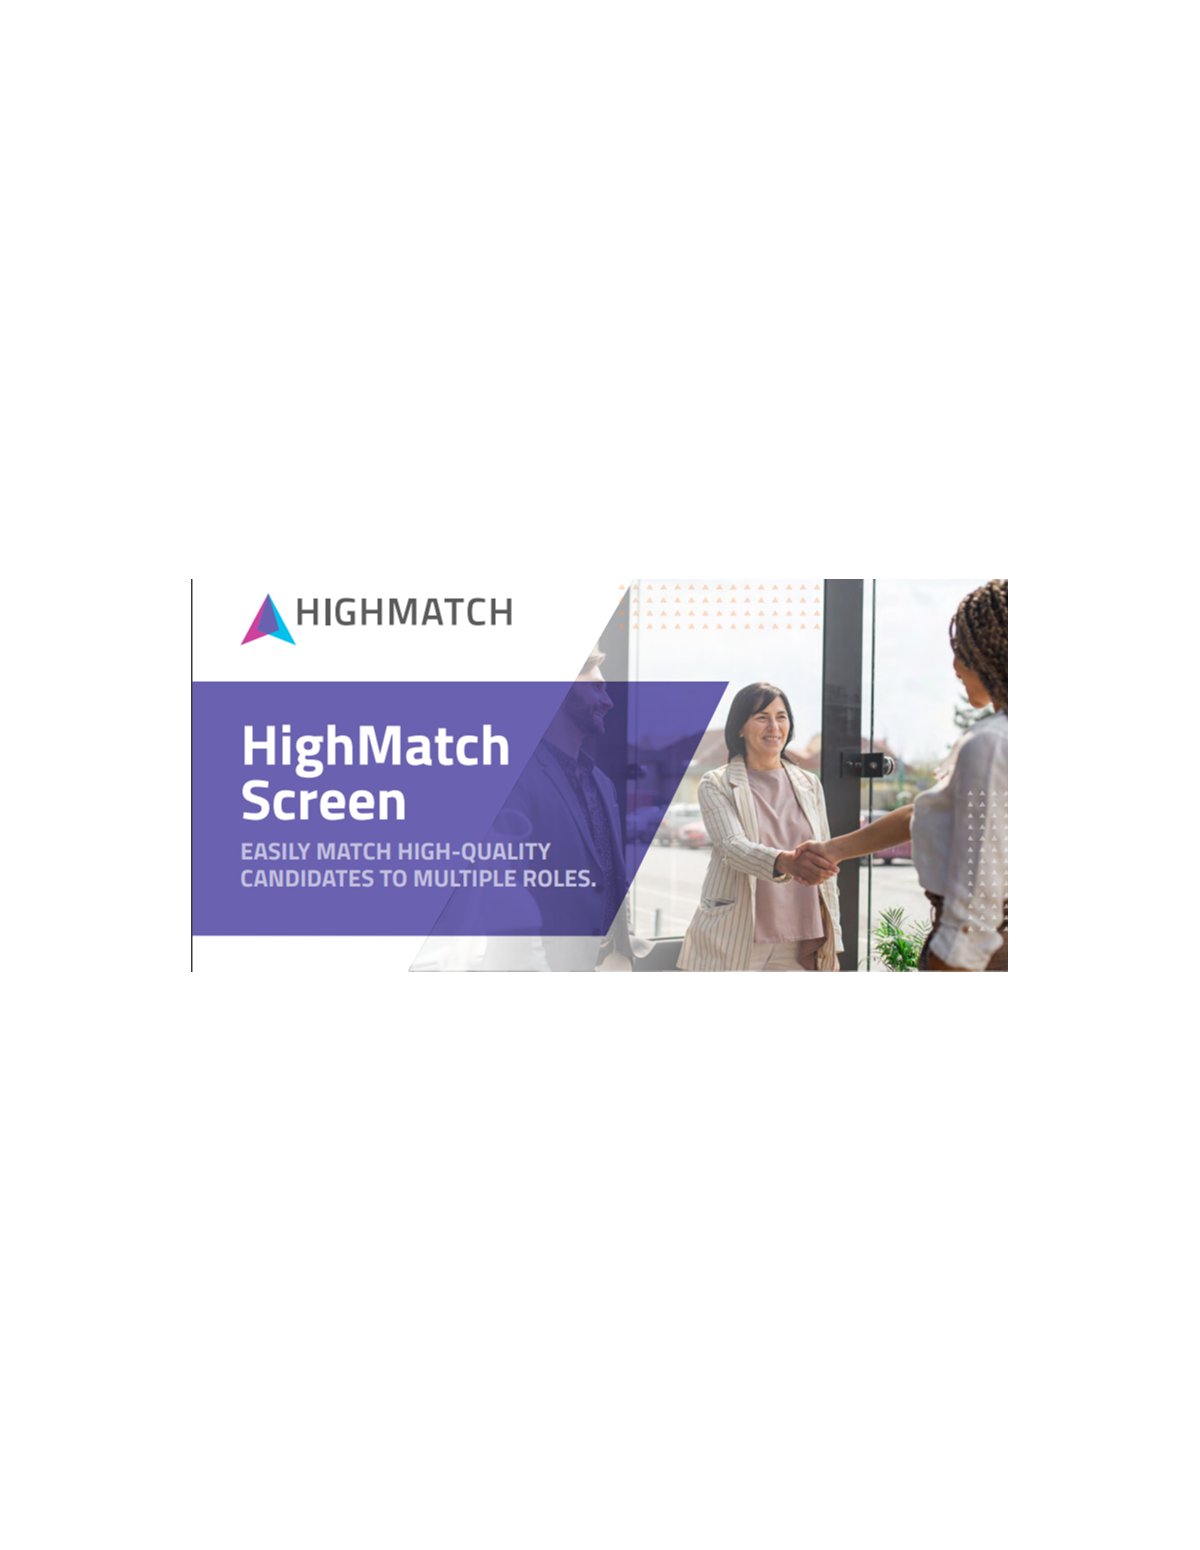 HighMatch Screen: Match High-Quality Candidates to Multiple Roles